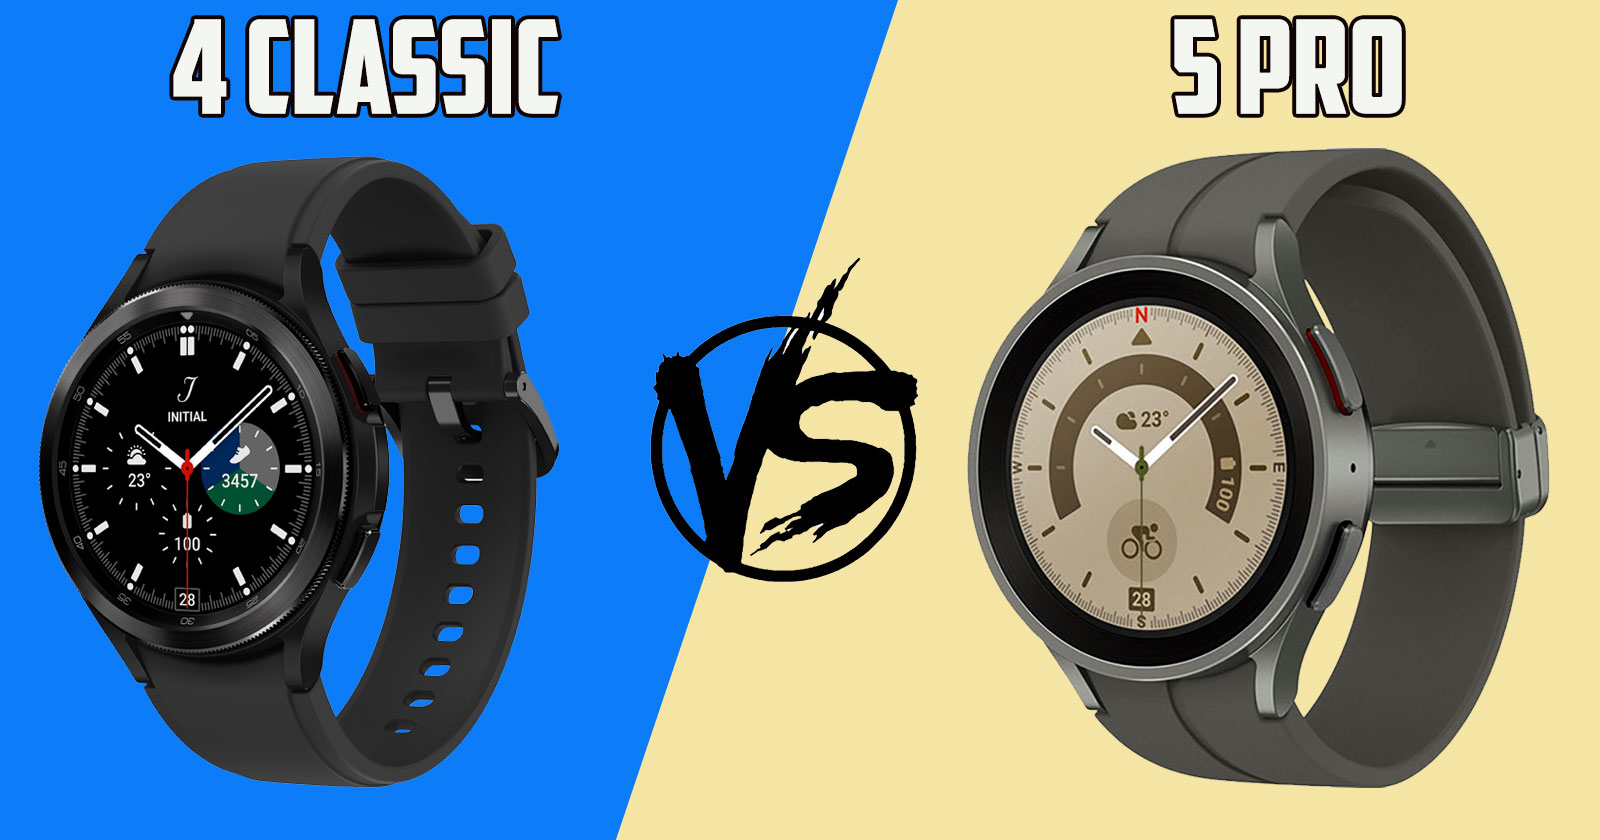 Difference Between Samsung Watch 4 Classic and Watch 5 Pro